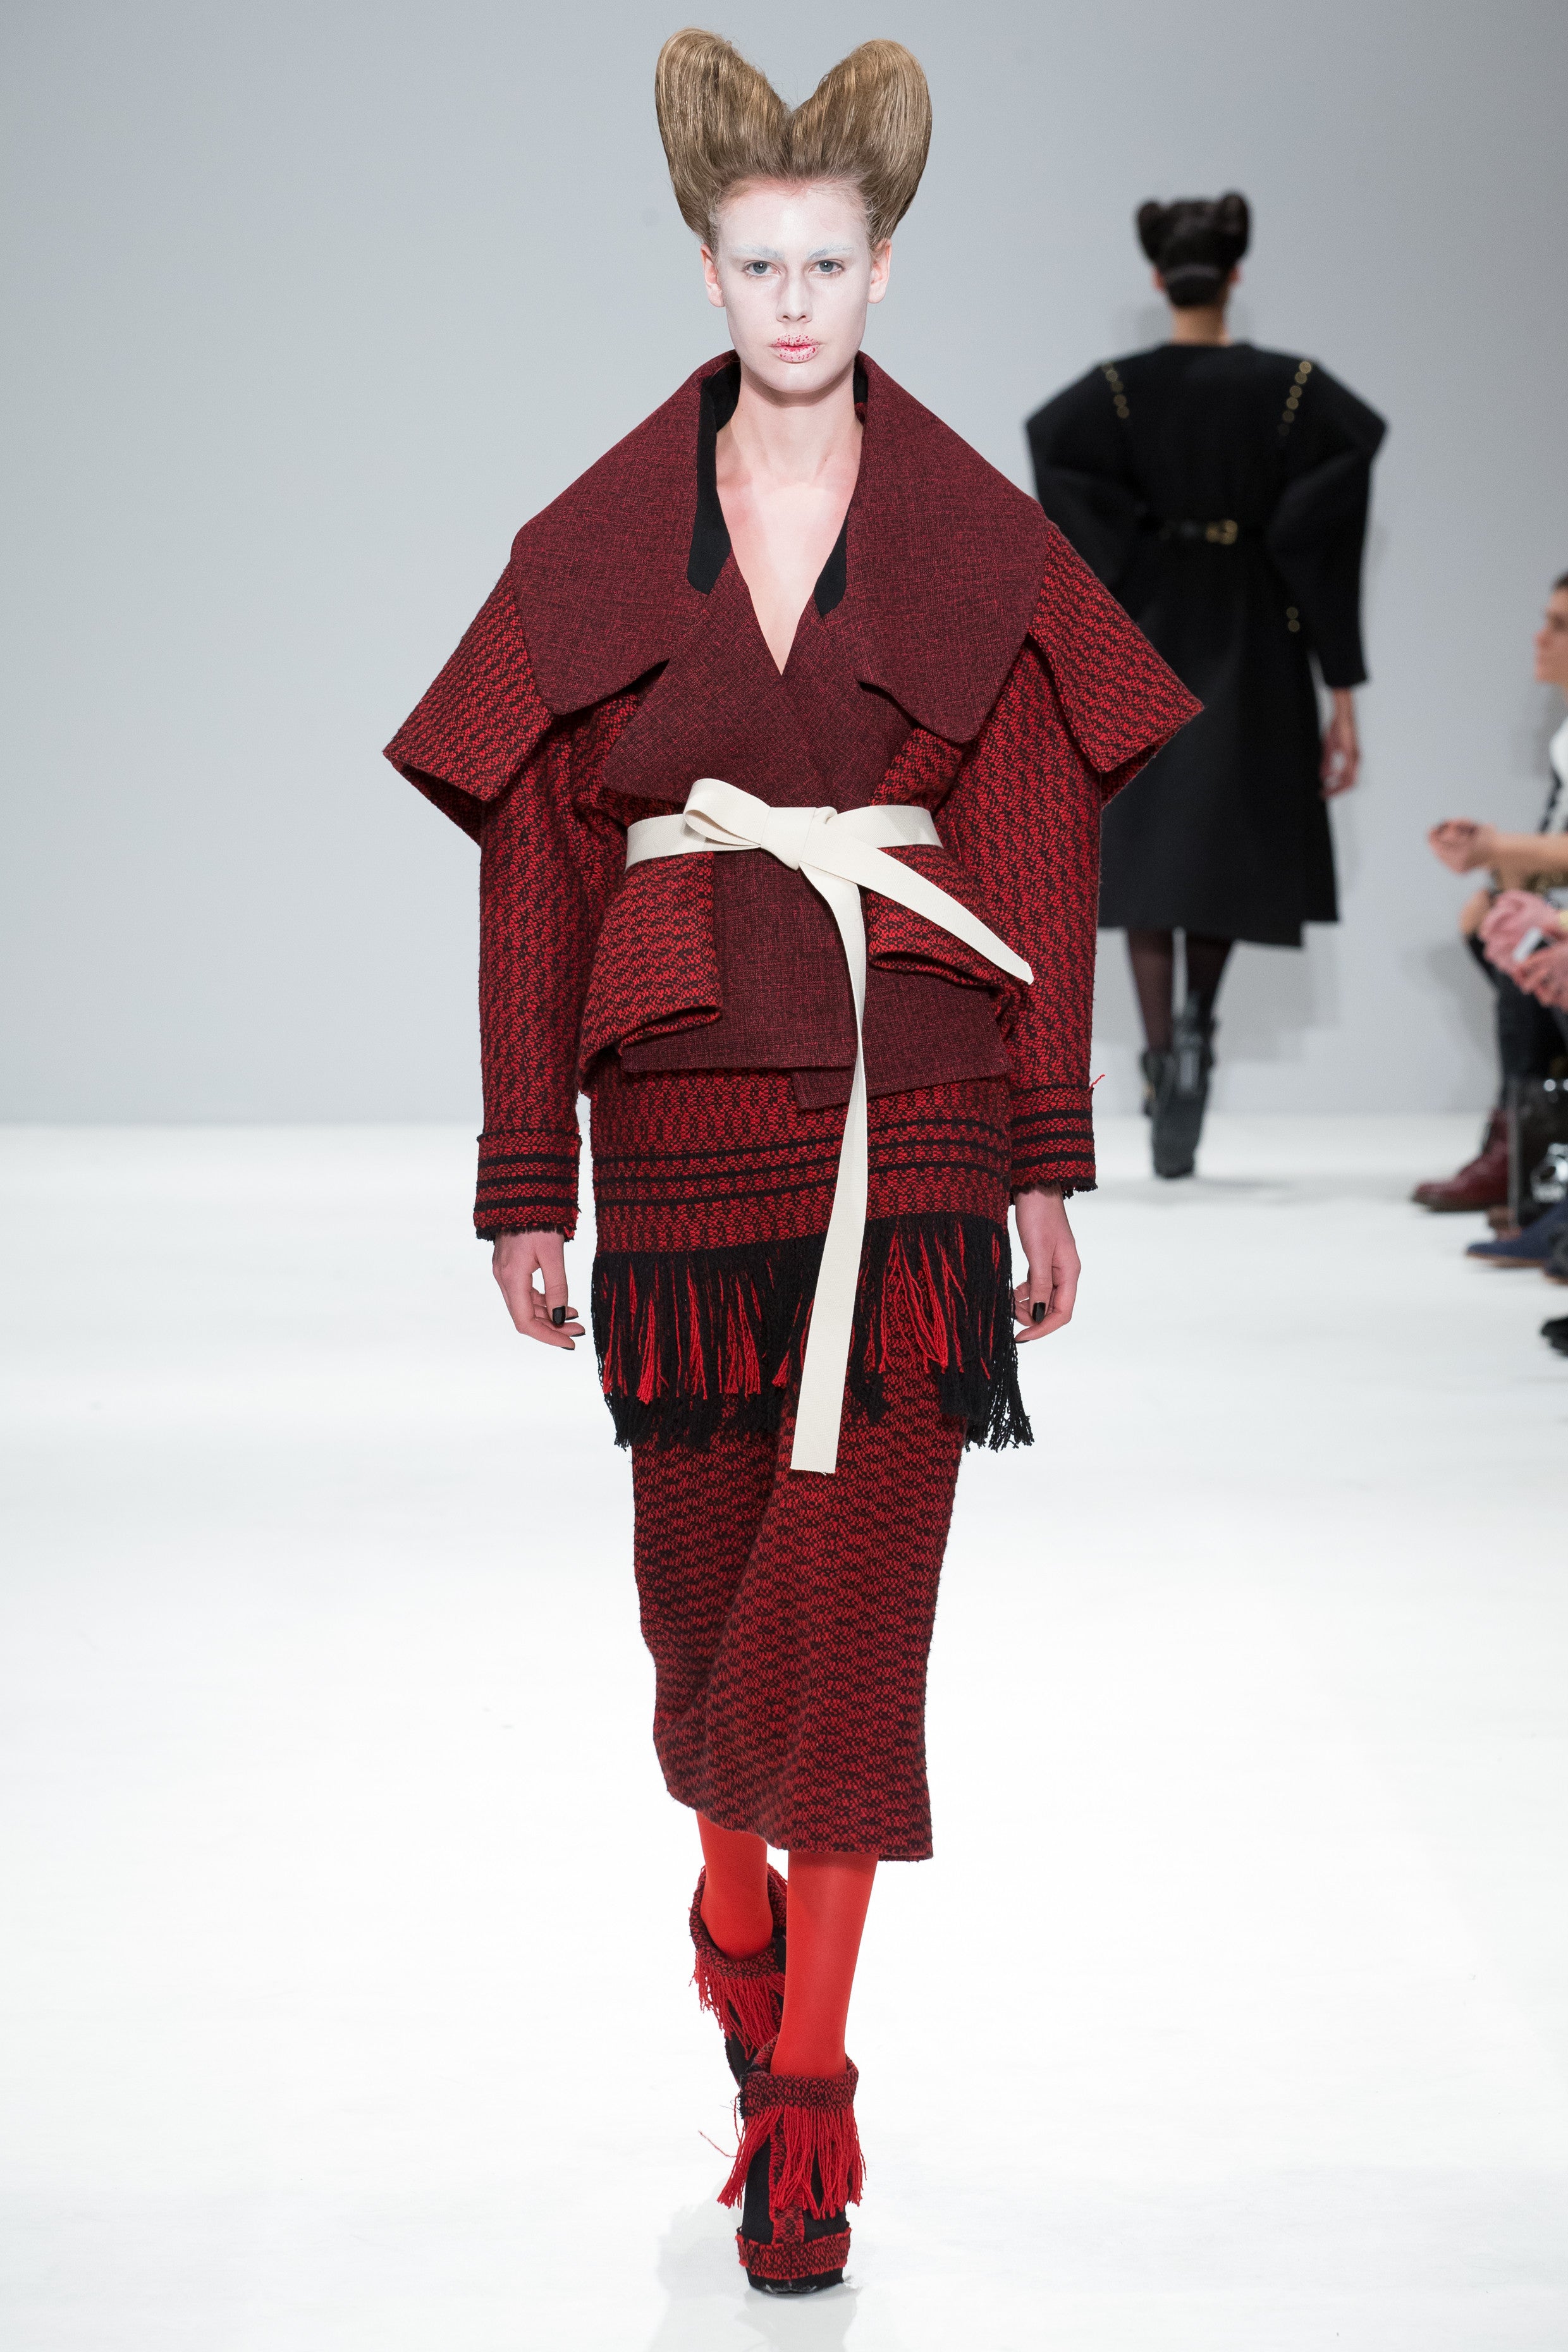 Red and Black armour jacket from the CIMONE AW17 catwalk show at London Fashion Week. Featuring a wide structured shoulder piece, resembling Japanese warrior armour styles.